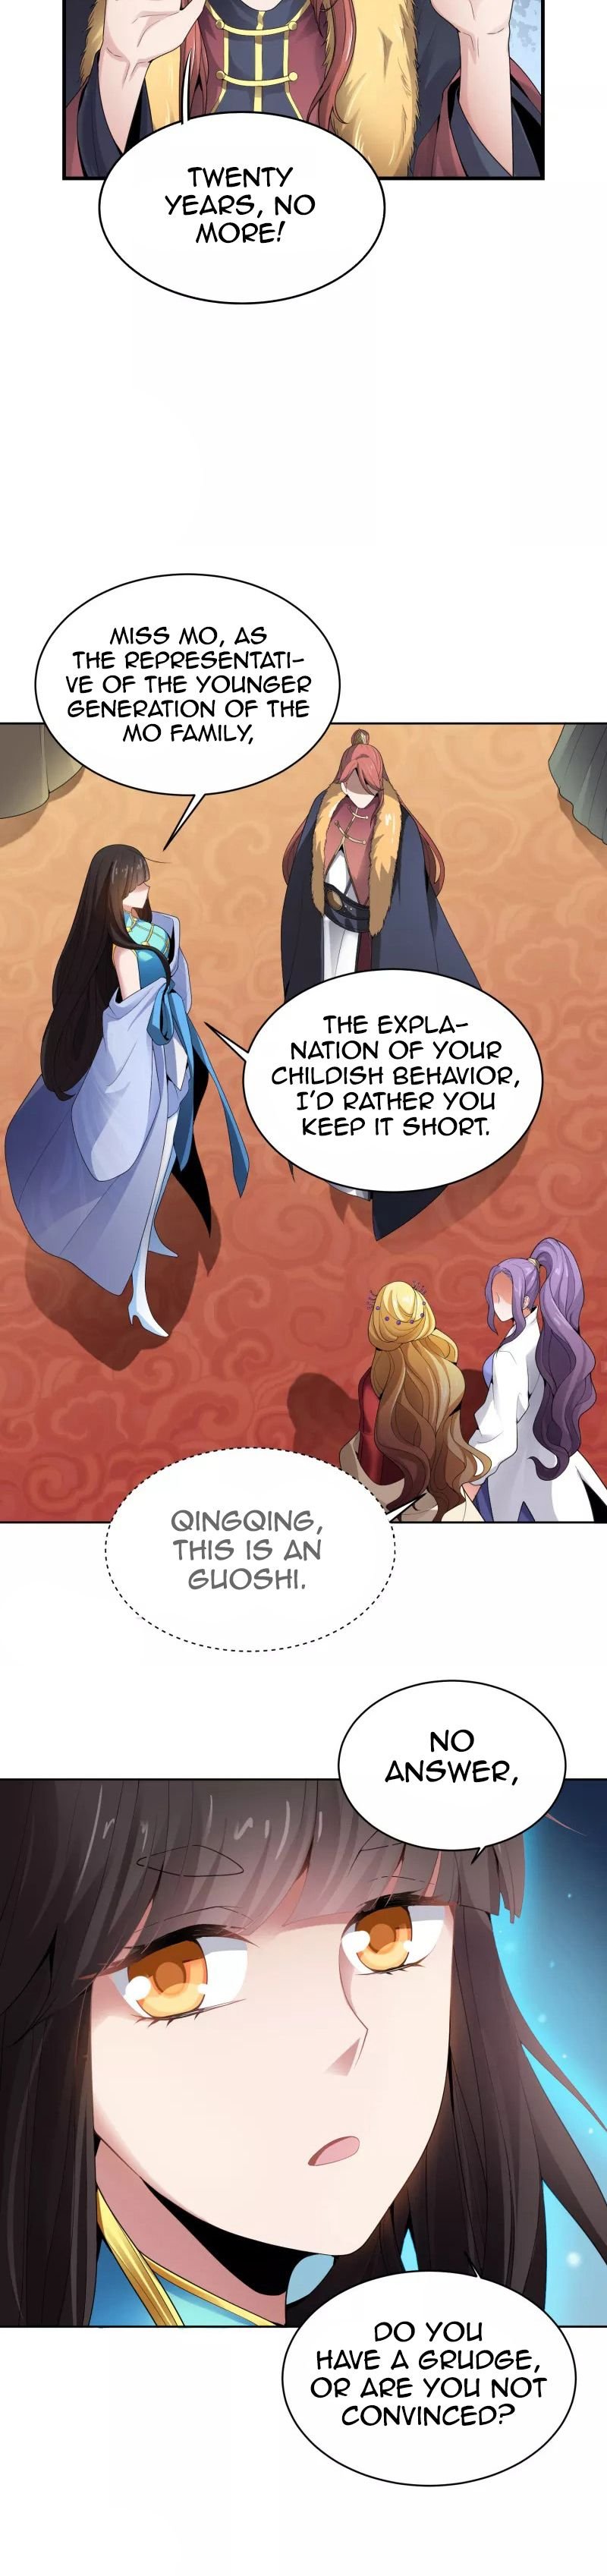 One Sword Reigns Supreme Chapter 31 - Page 4